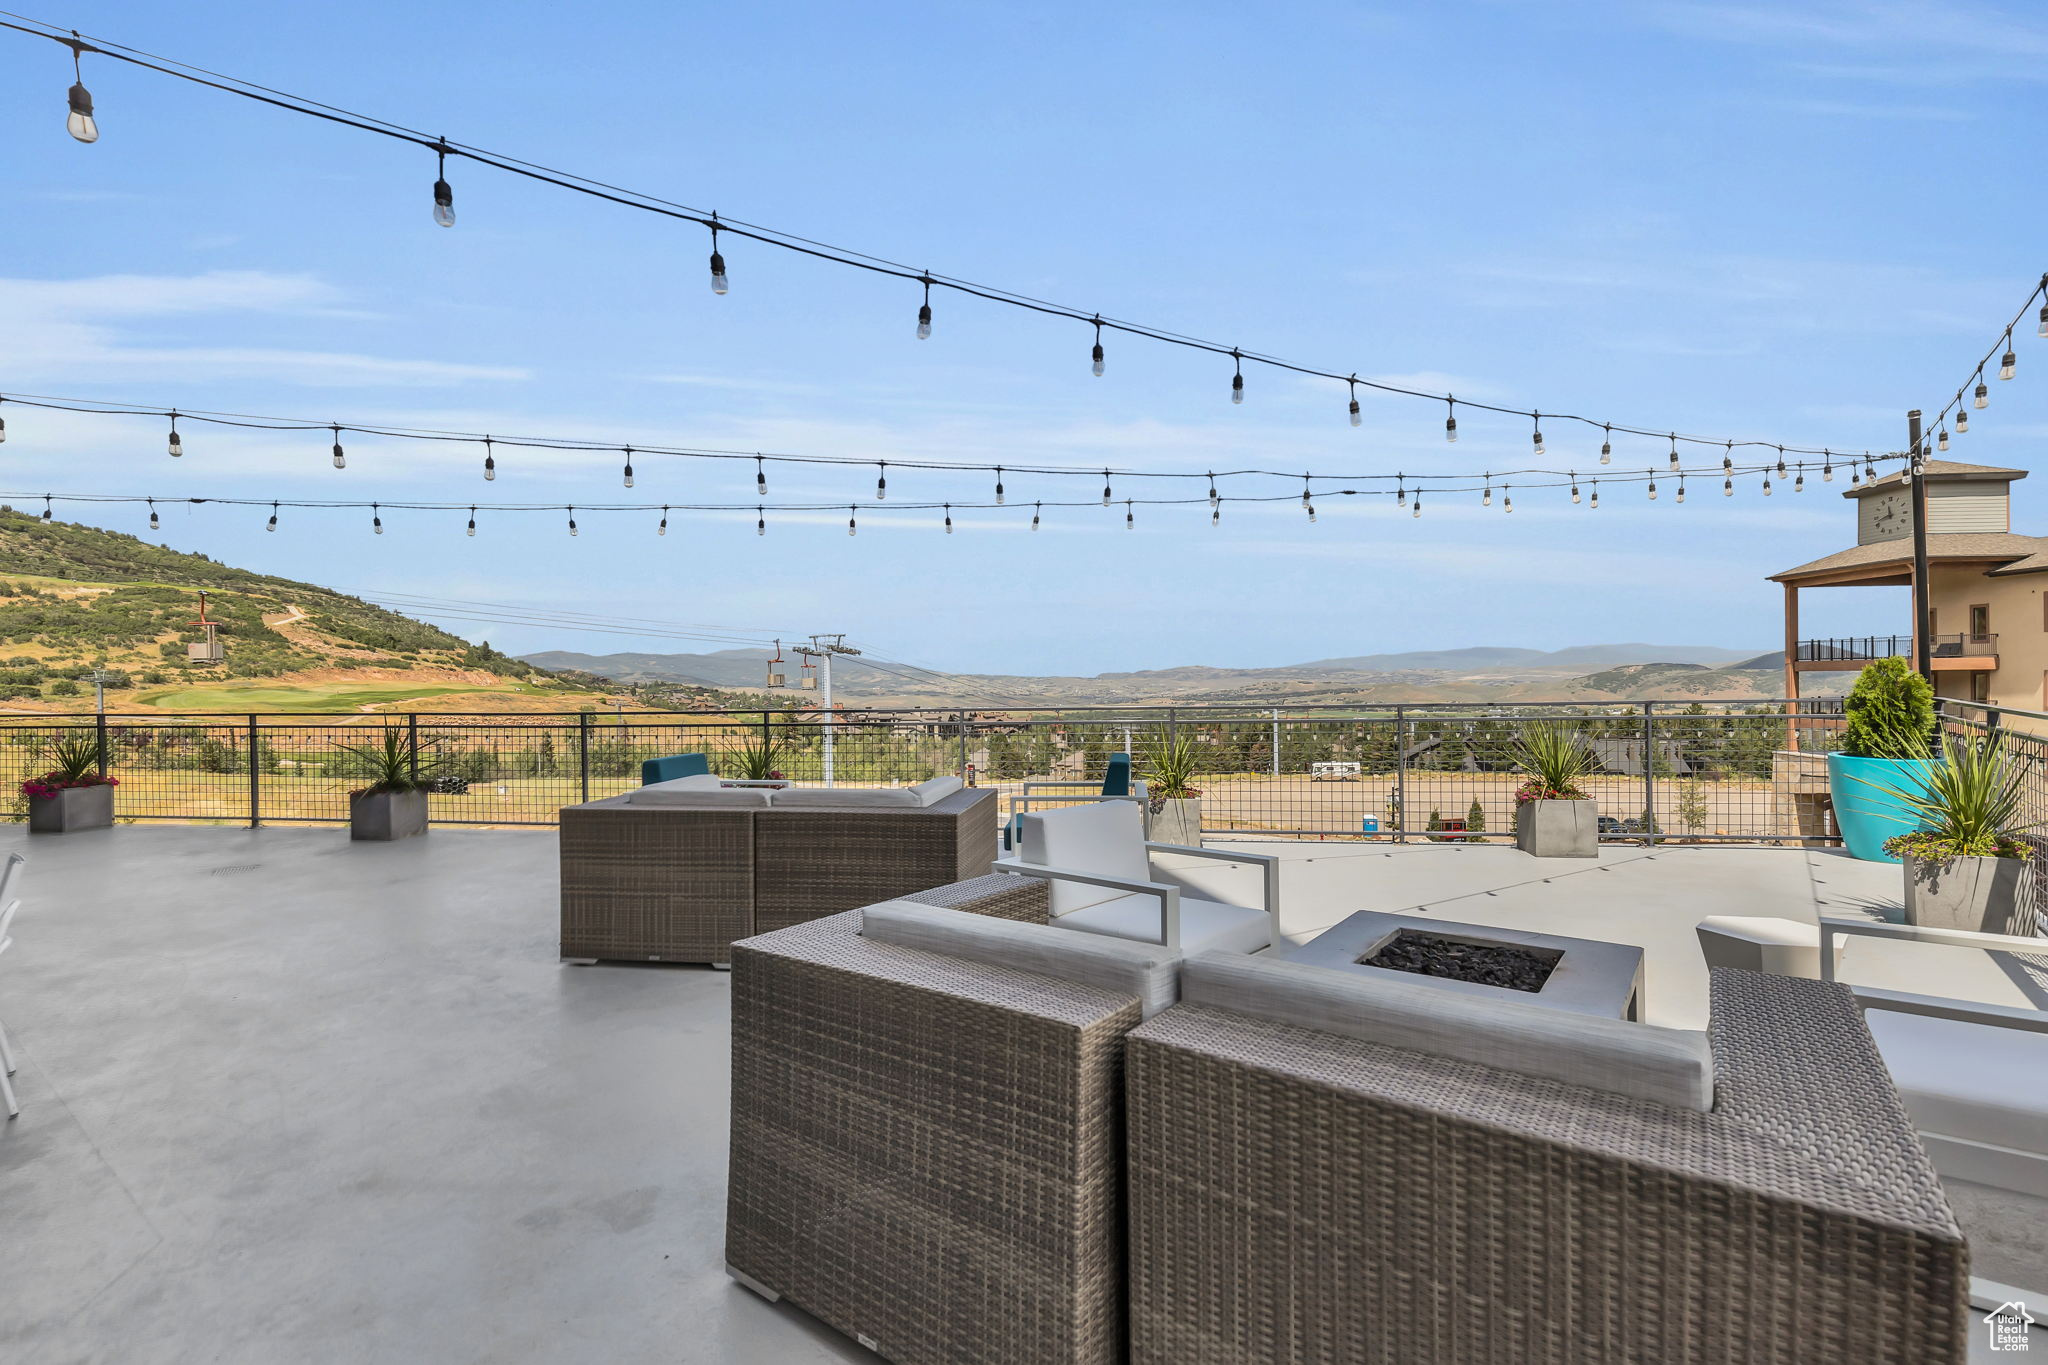 View of terrace with a mountain view and an outdoor living space with a fire pit